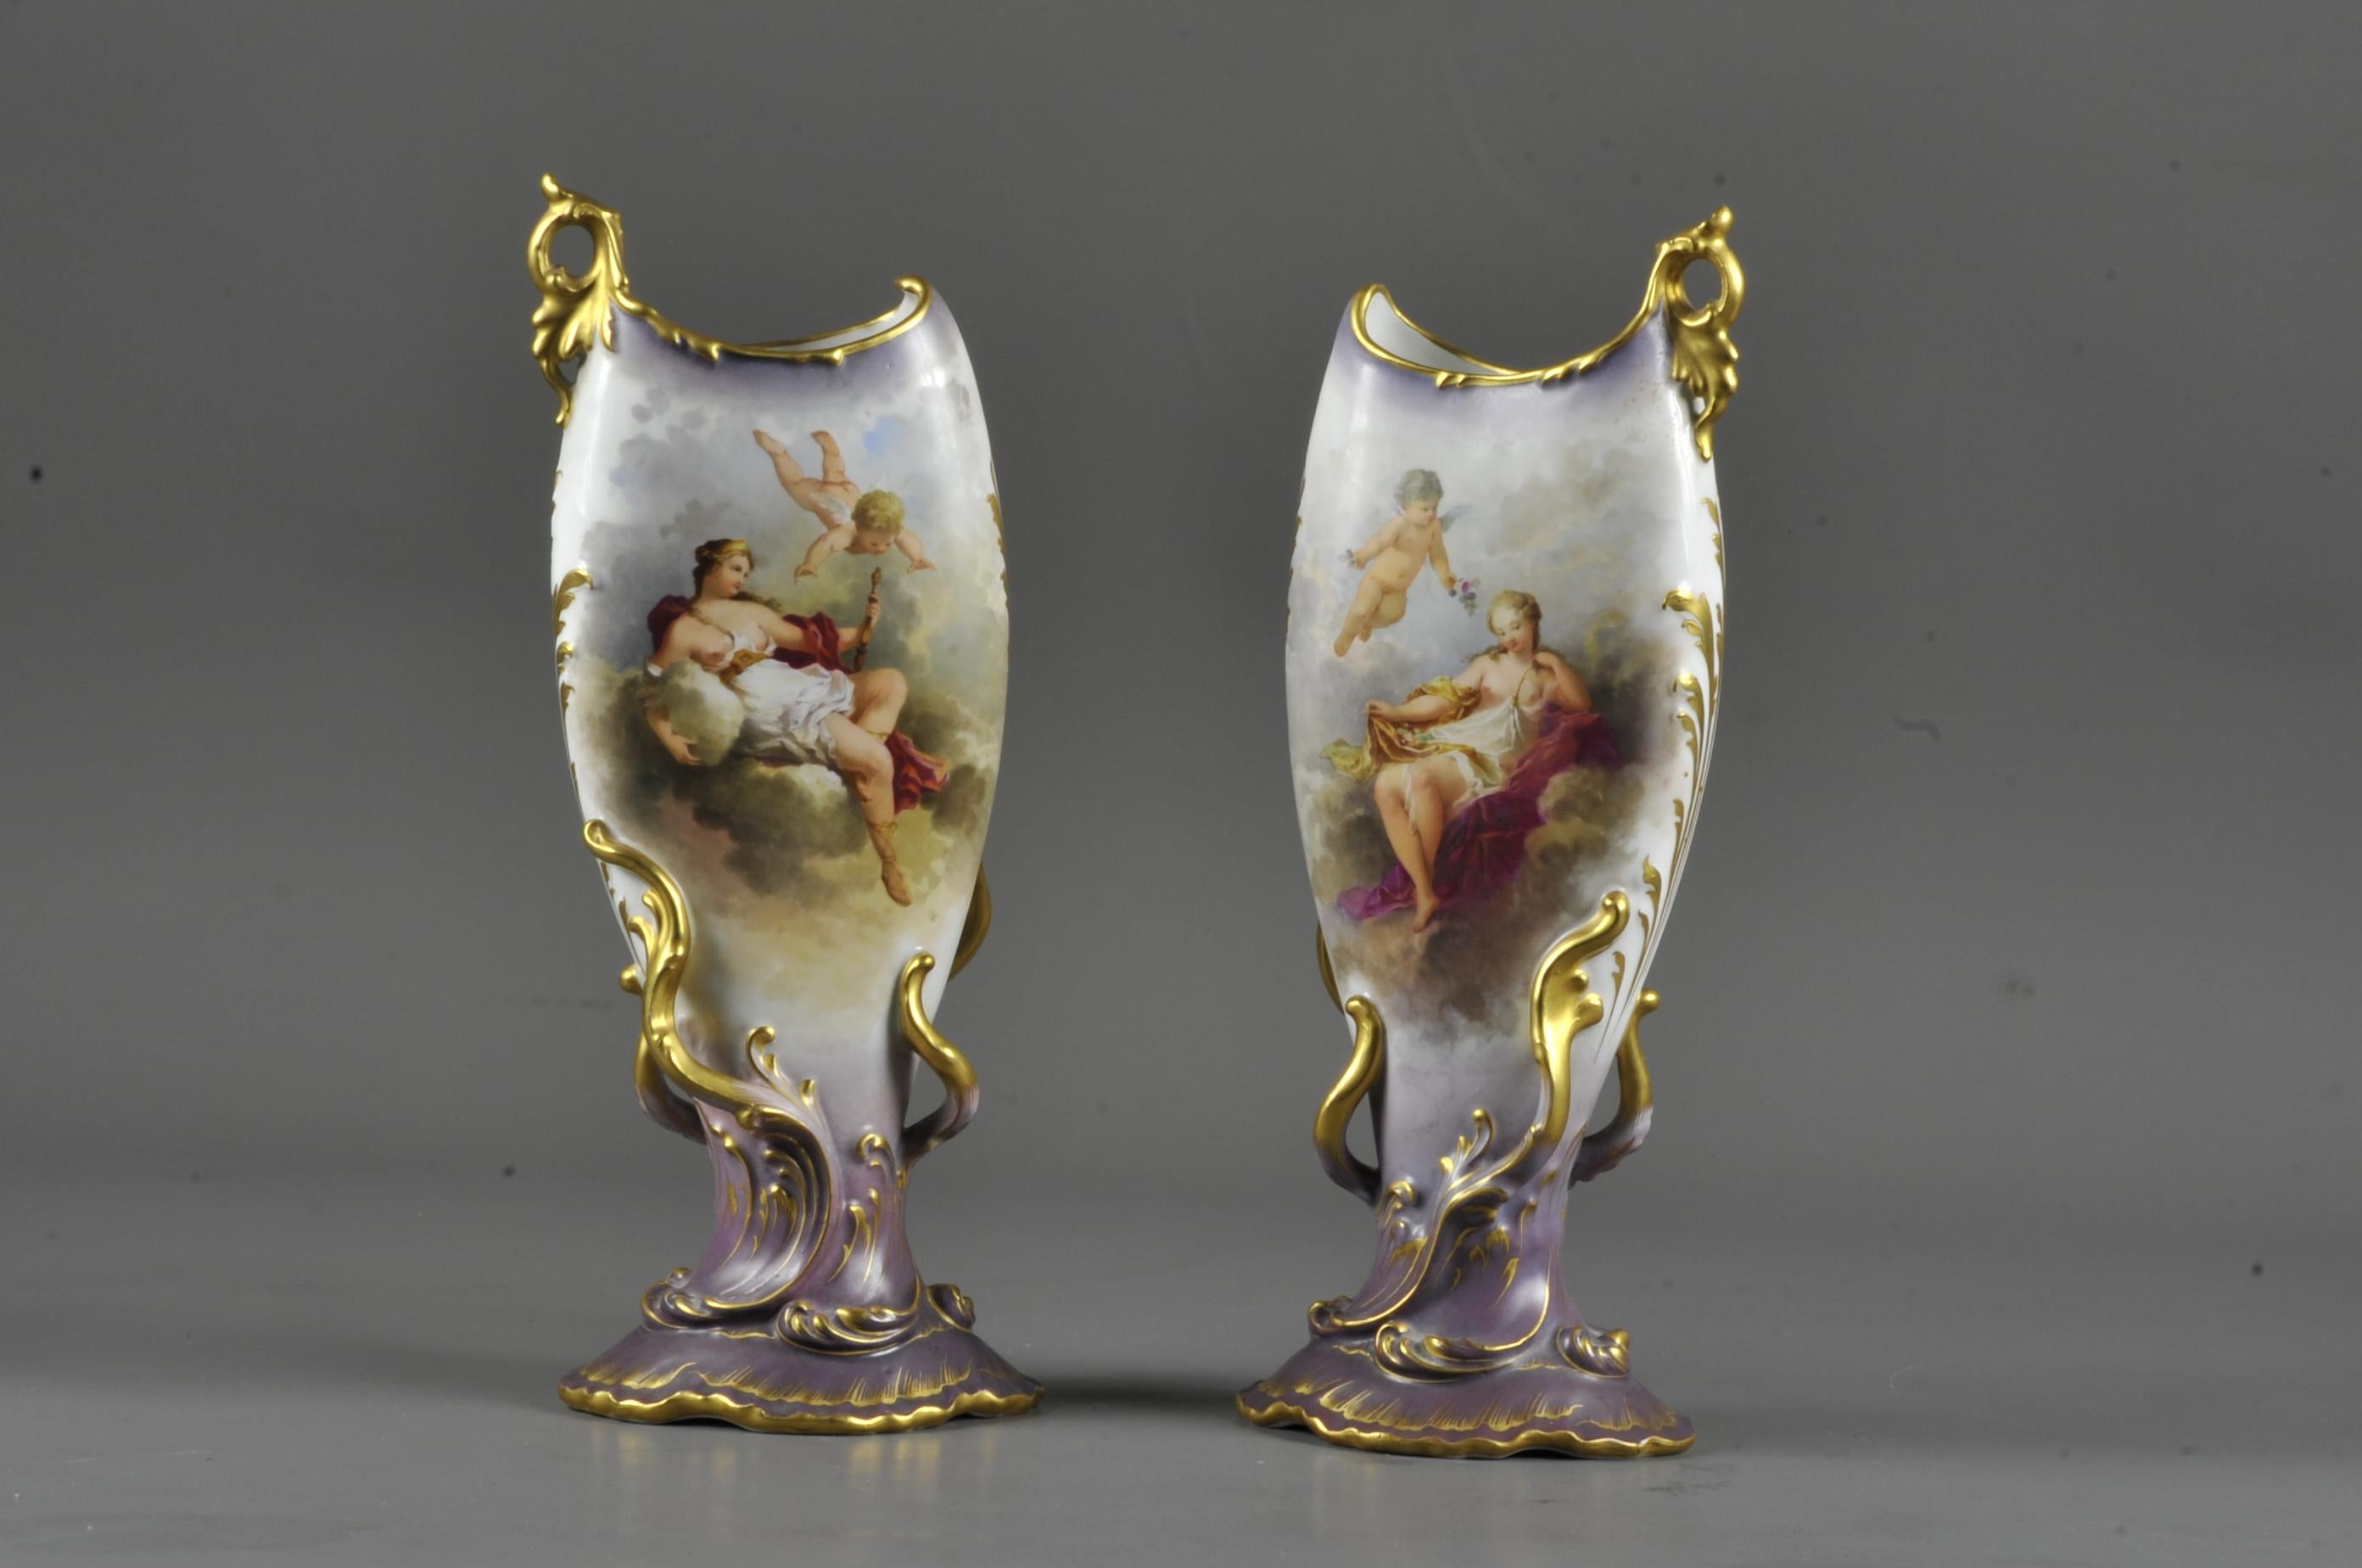 Magnificent and rare pair of vases from the Art Nouveau period and neo-romantic inspiration with turbulent shapes decorated with golden foliage, on a purple base and an elongated body in shades of gray.

The two slightly inclined vases accentuate